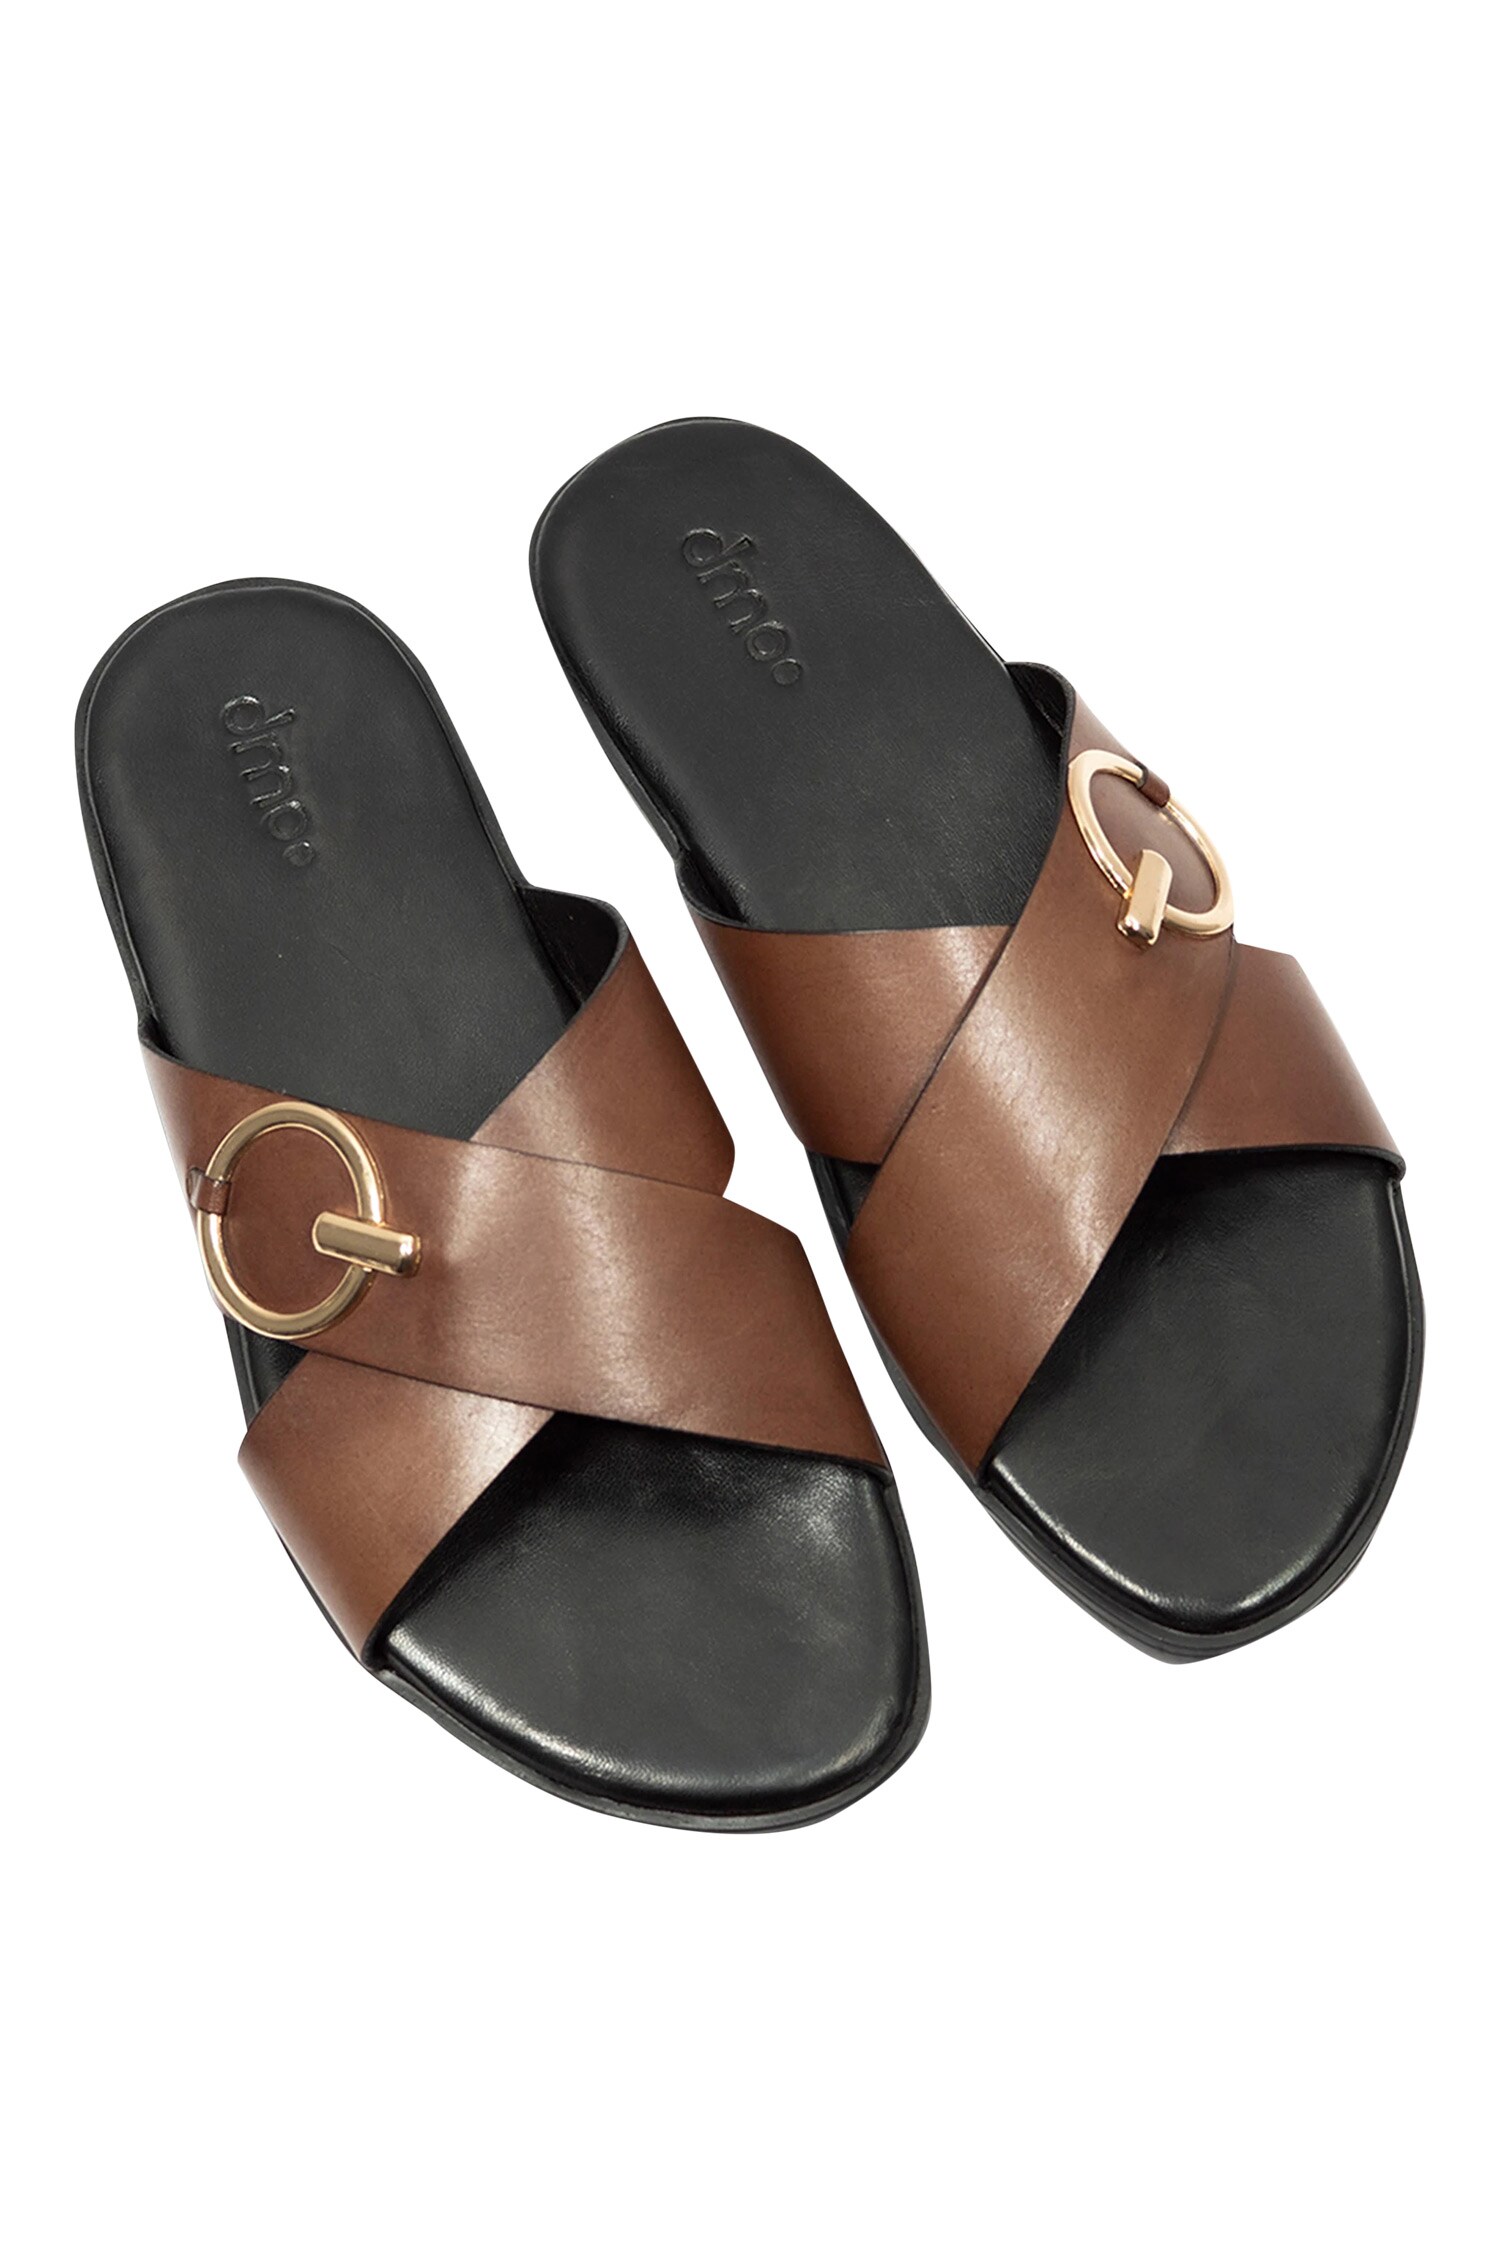 Dmodot Brown Leather Cross Strap Sandals